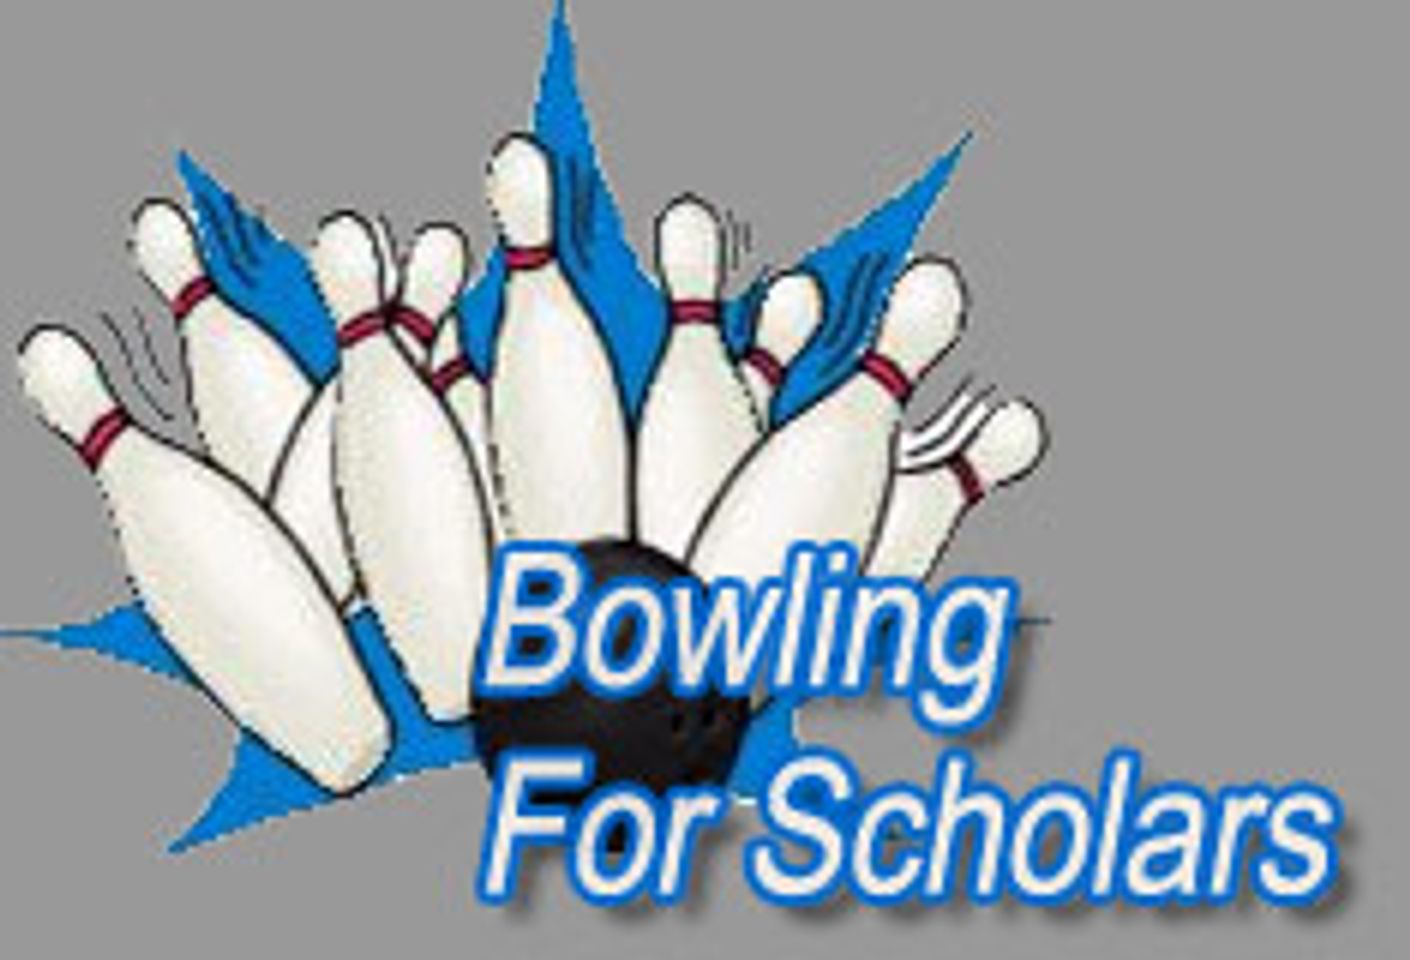 Bowling For Scholars Offers a Good Time for a Good Cause